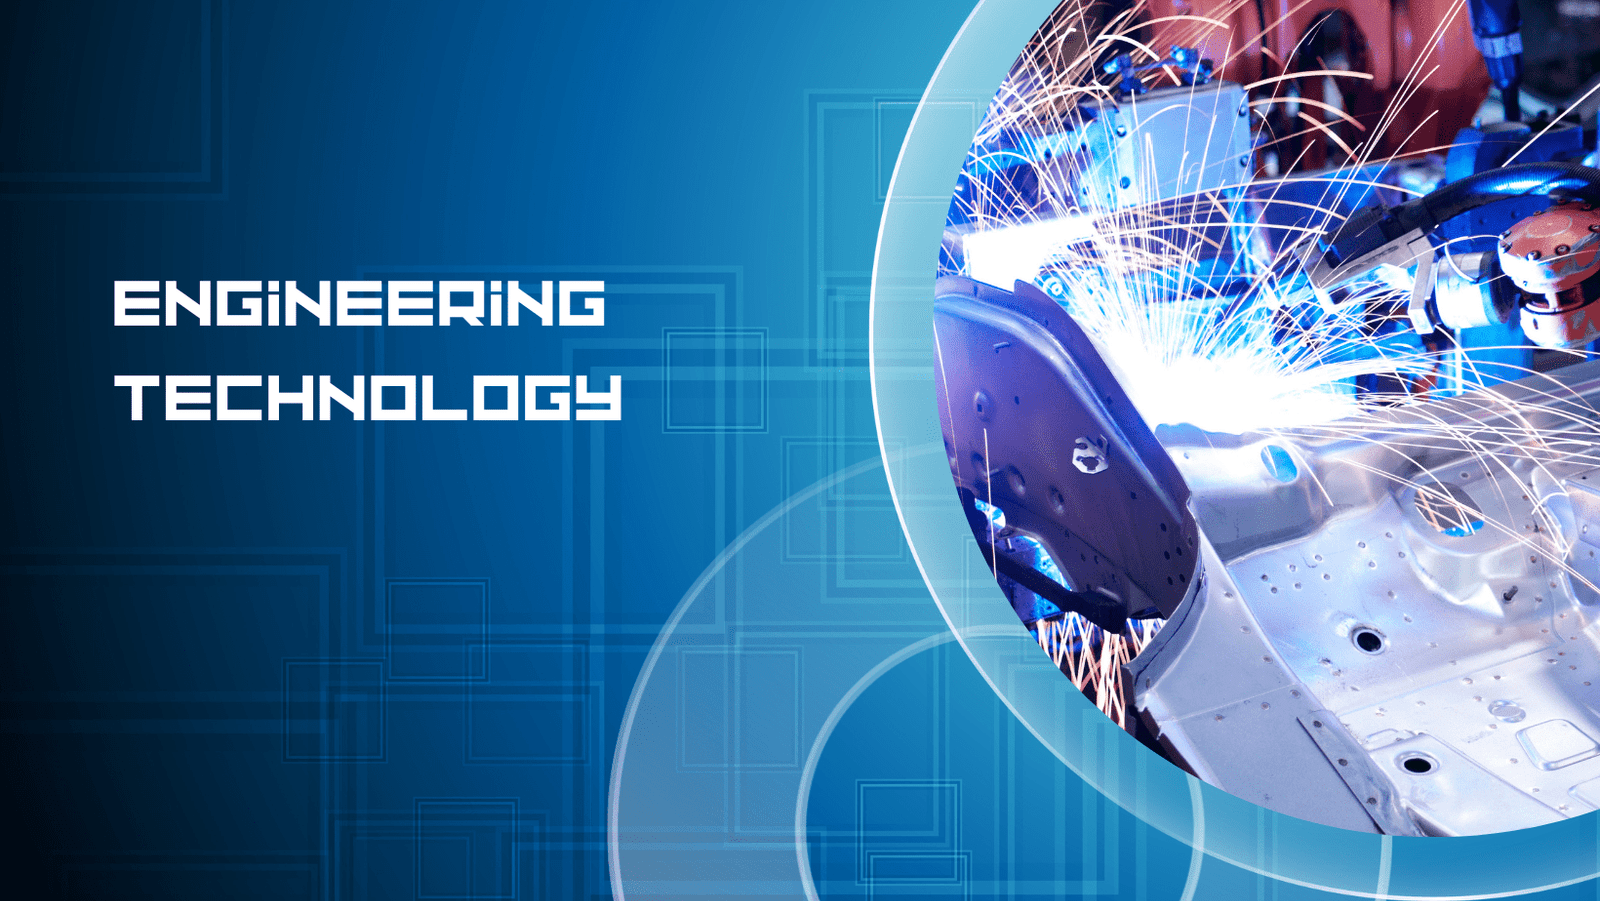 The intervention of new electric products with a combination of technical knowledge and hand skills is called engineering technology.